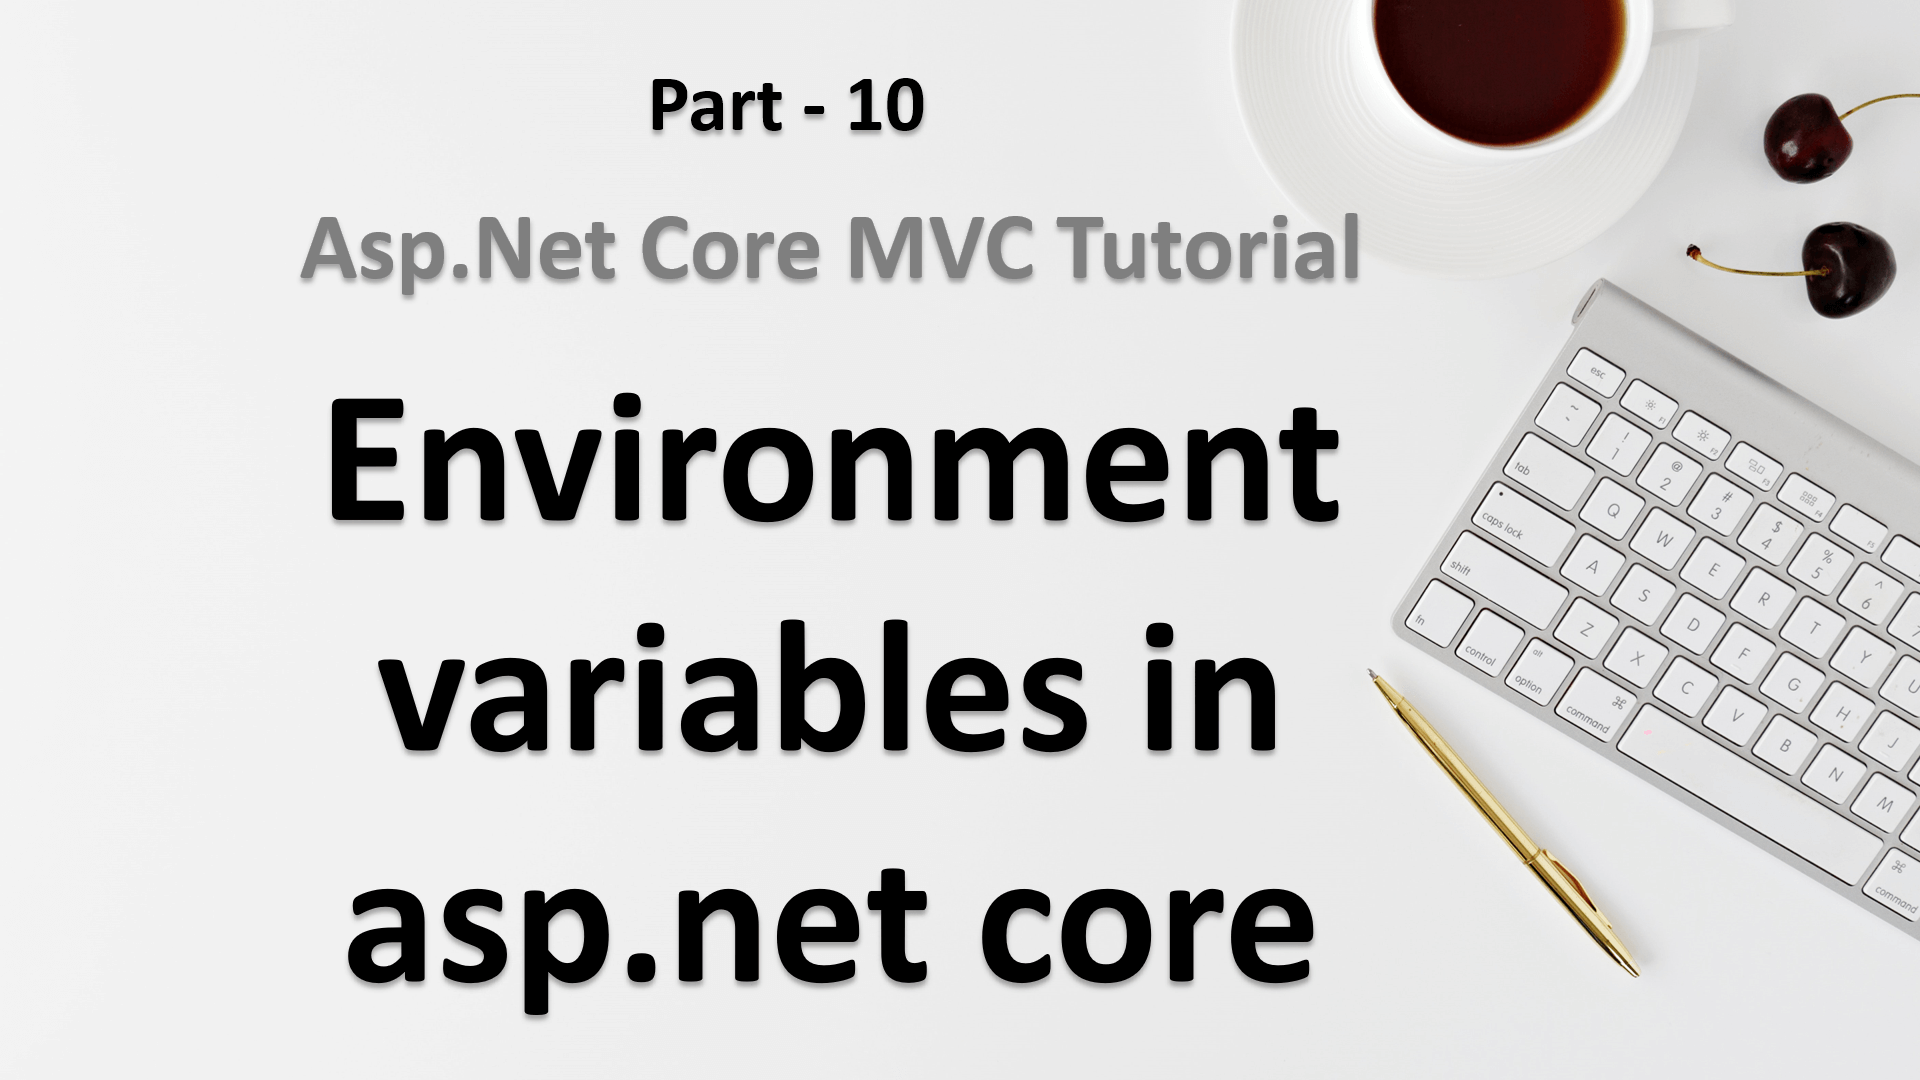 Environment variables in asp.net core | Asp.Net Core tutorial for beginners